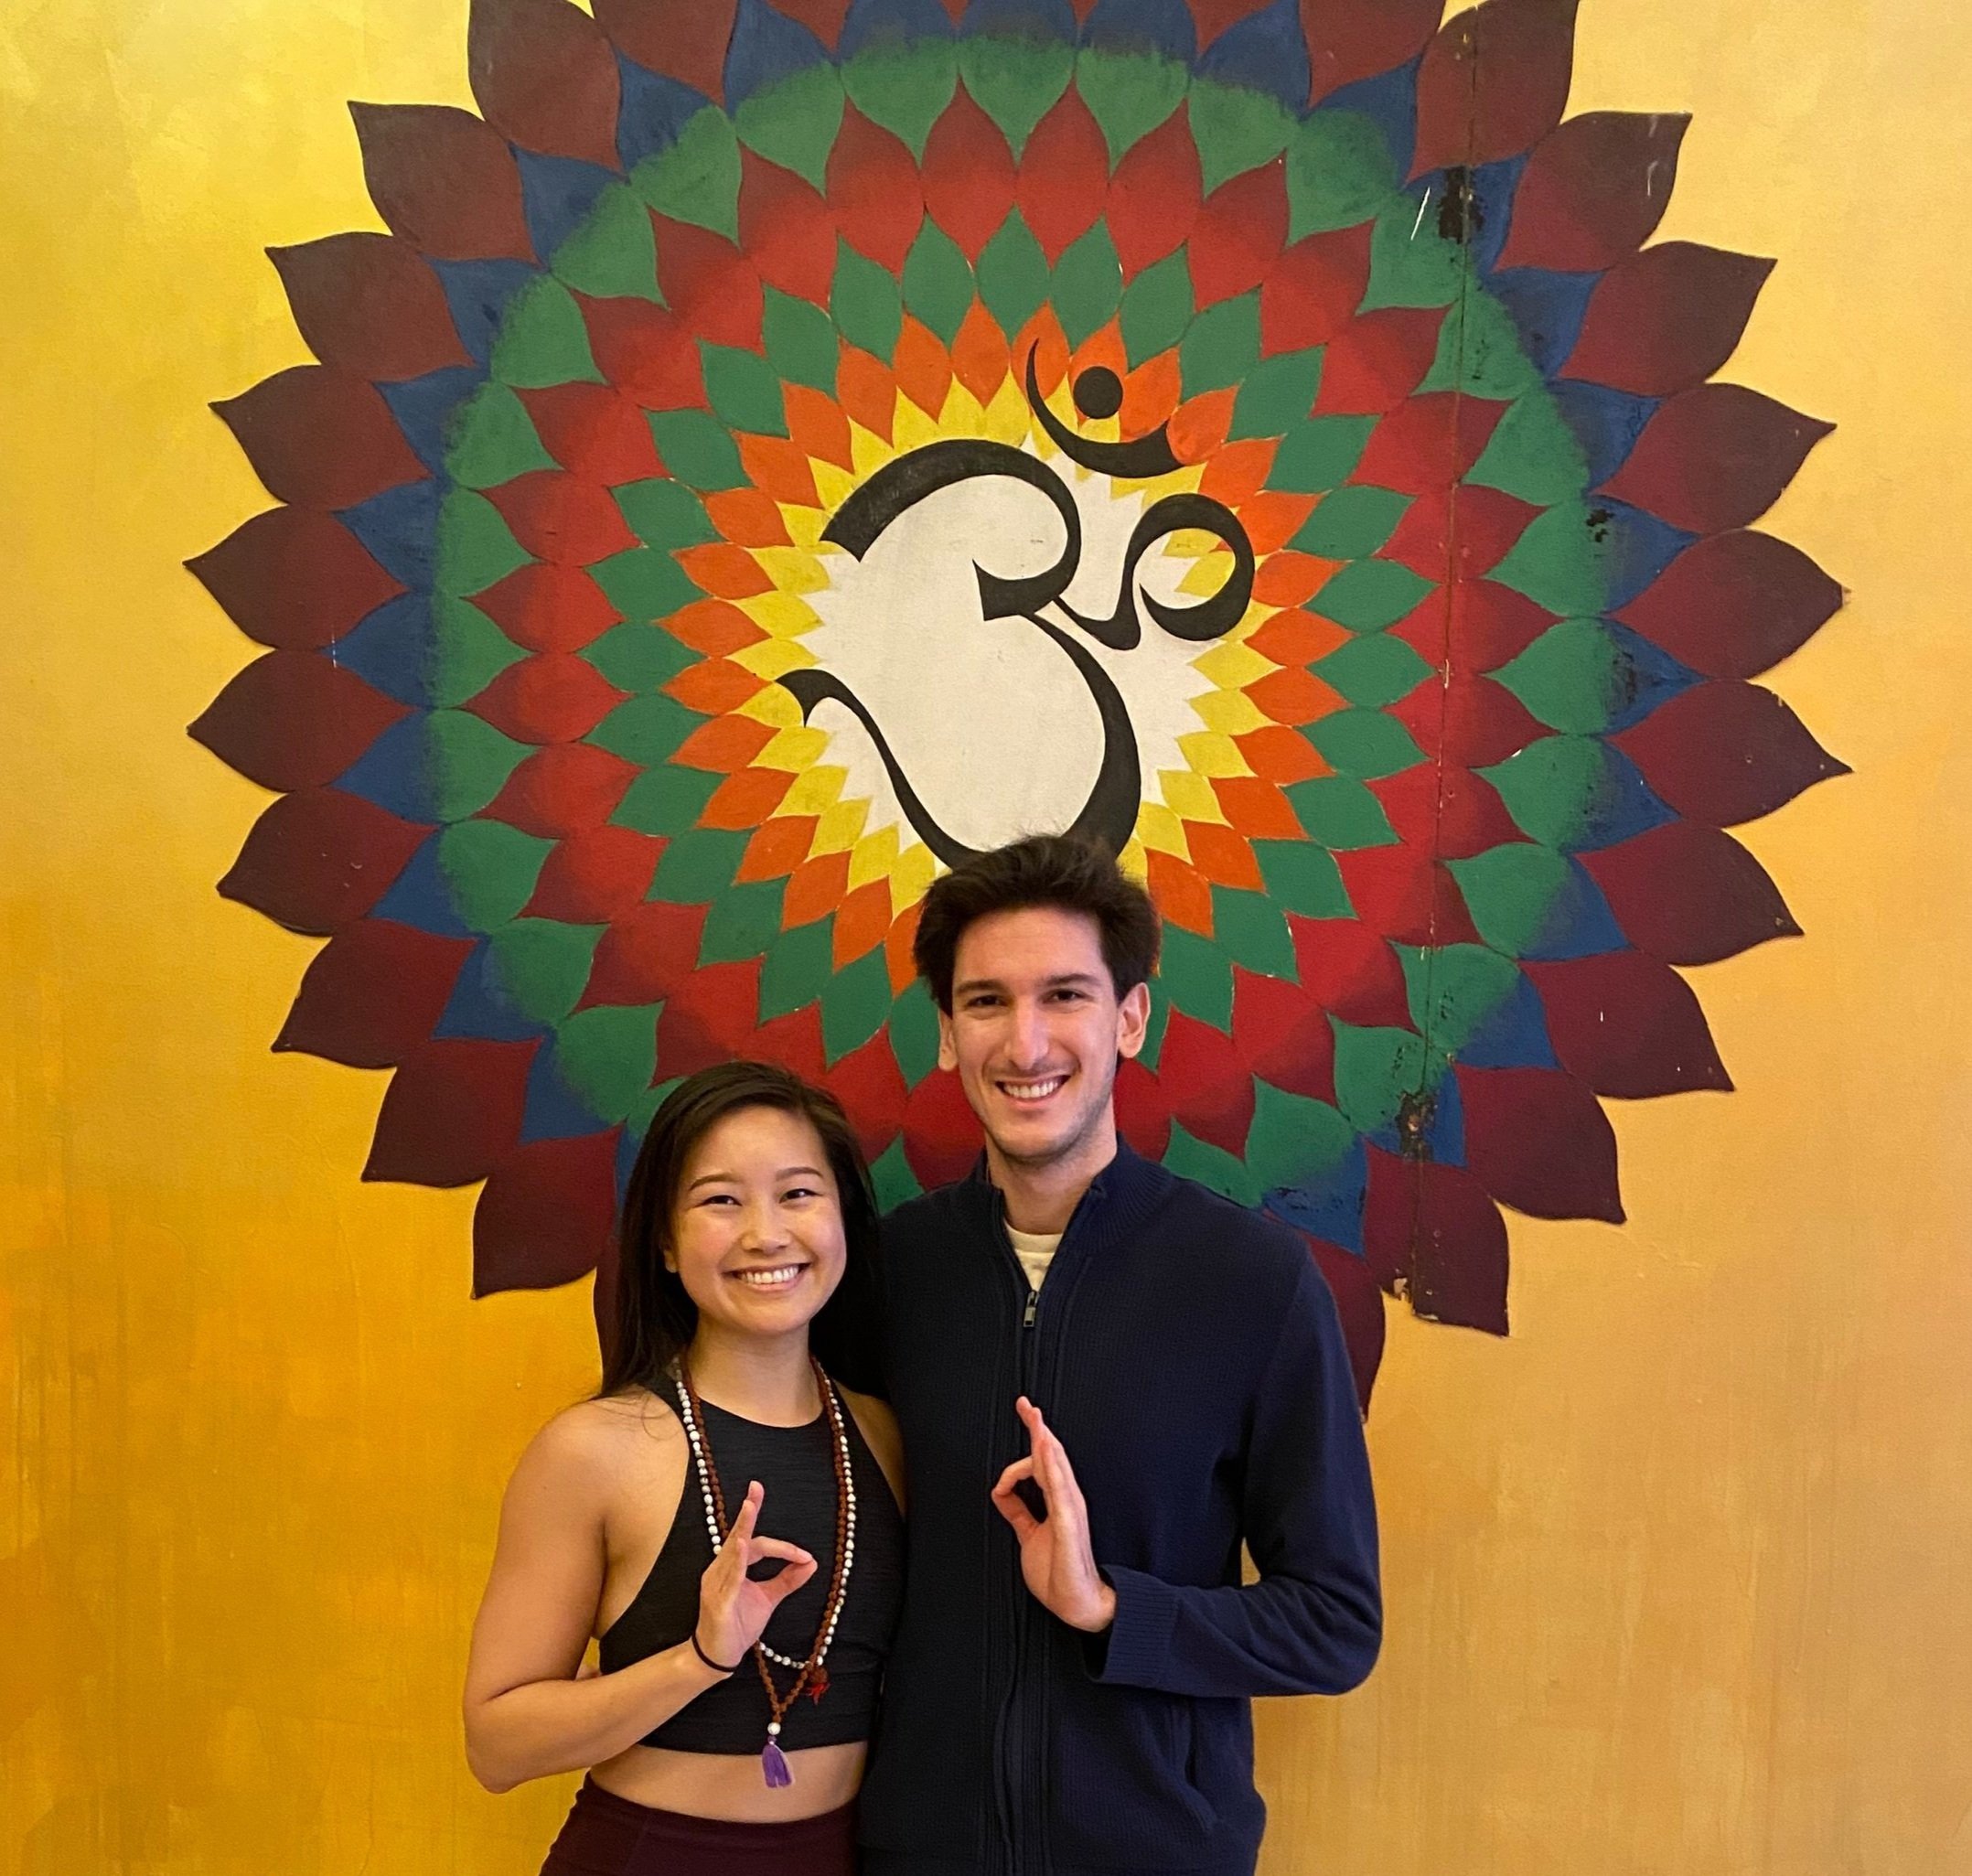 Yoga practitioners Dr. Jonathan Rosenthal and Jessica Hwang standing in front of an Om symbol, holding their hands in Gyana Mudra, a gesture of wisdom and inner peace.